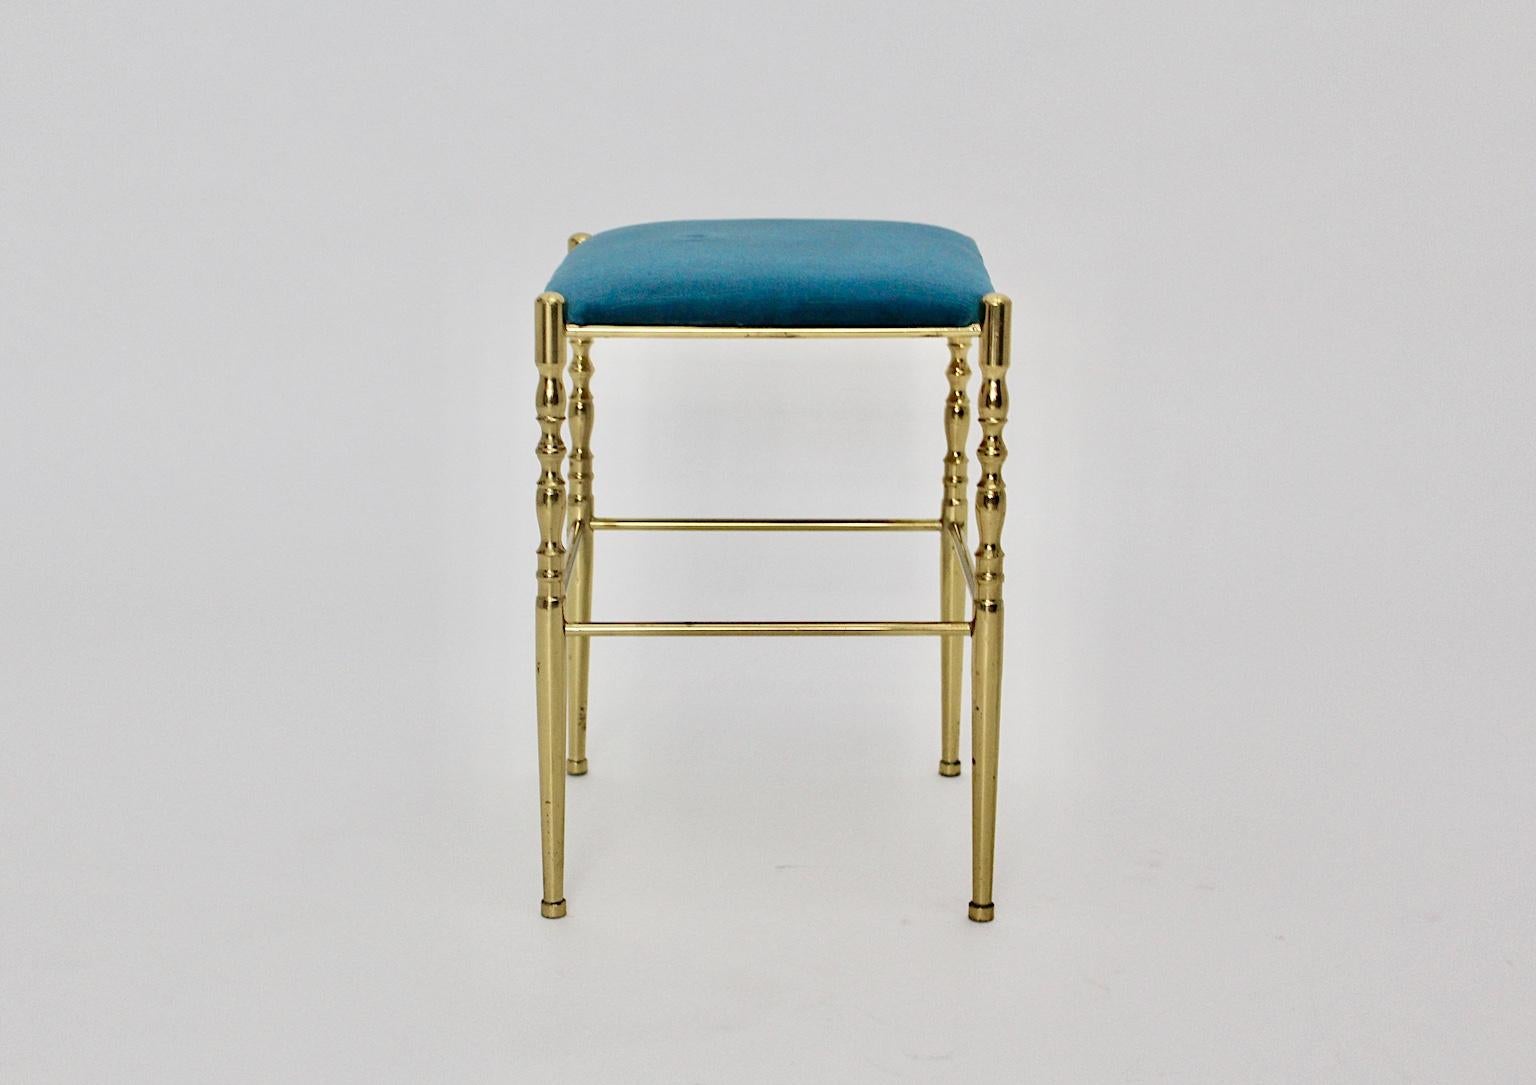 Mid-Century Modern vintage brass stool Chiavari 1950s Italy, which shows a brass frame and an upholstered seat.
The seat is newly covered with blue velvet fabric and is in very good condition, while the brass frame shows minor signs of